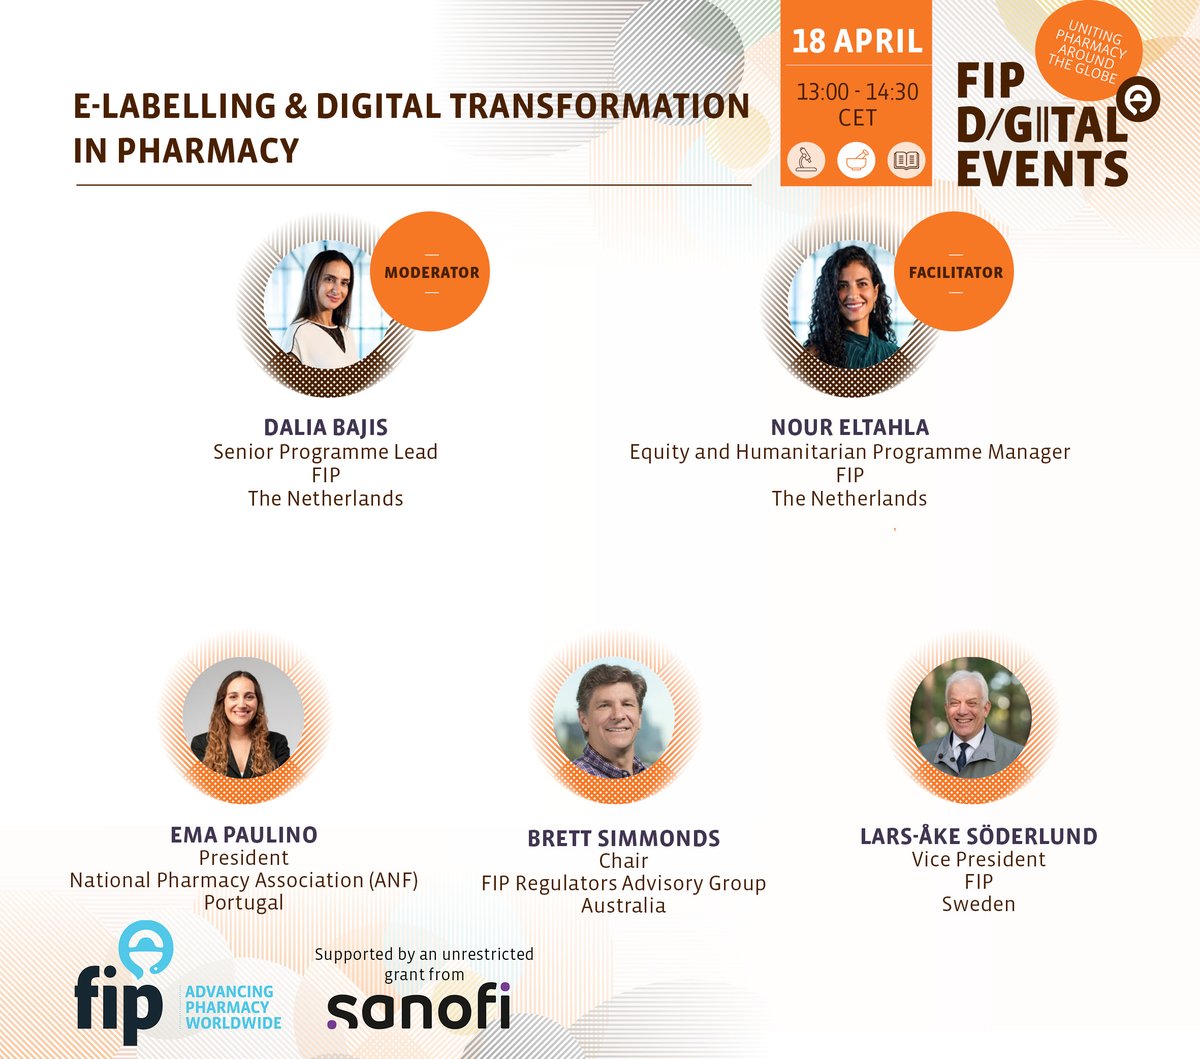 Only 1 week until @FIP_org Digital Transformation webinar & E-labelling report launch! #Elabels can improve health equity, accessibility & #healthliteracy but these benefits need a collaborative regulatory environment Don’t miss the panel, register now: rb.gy/mafxua